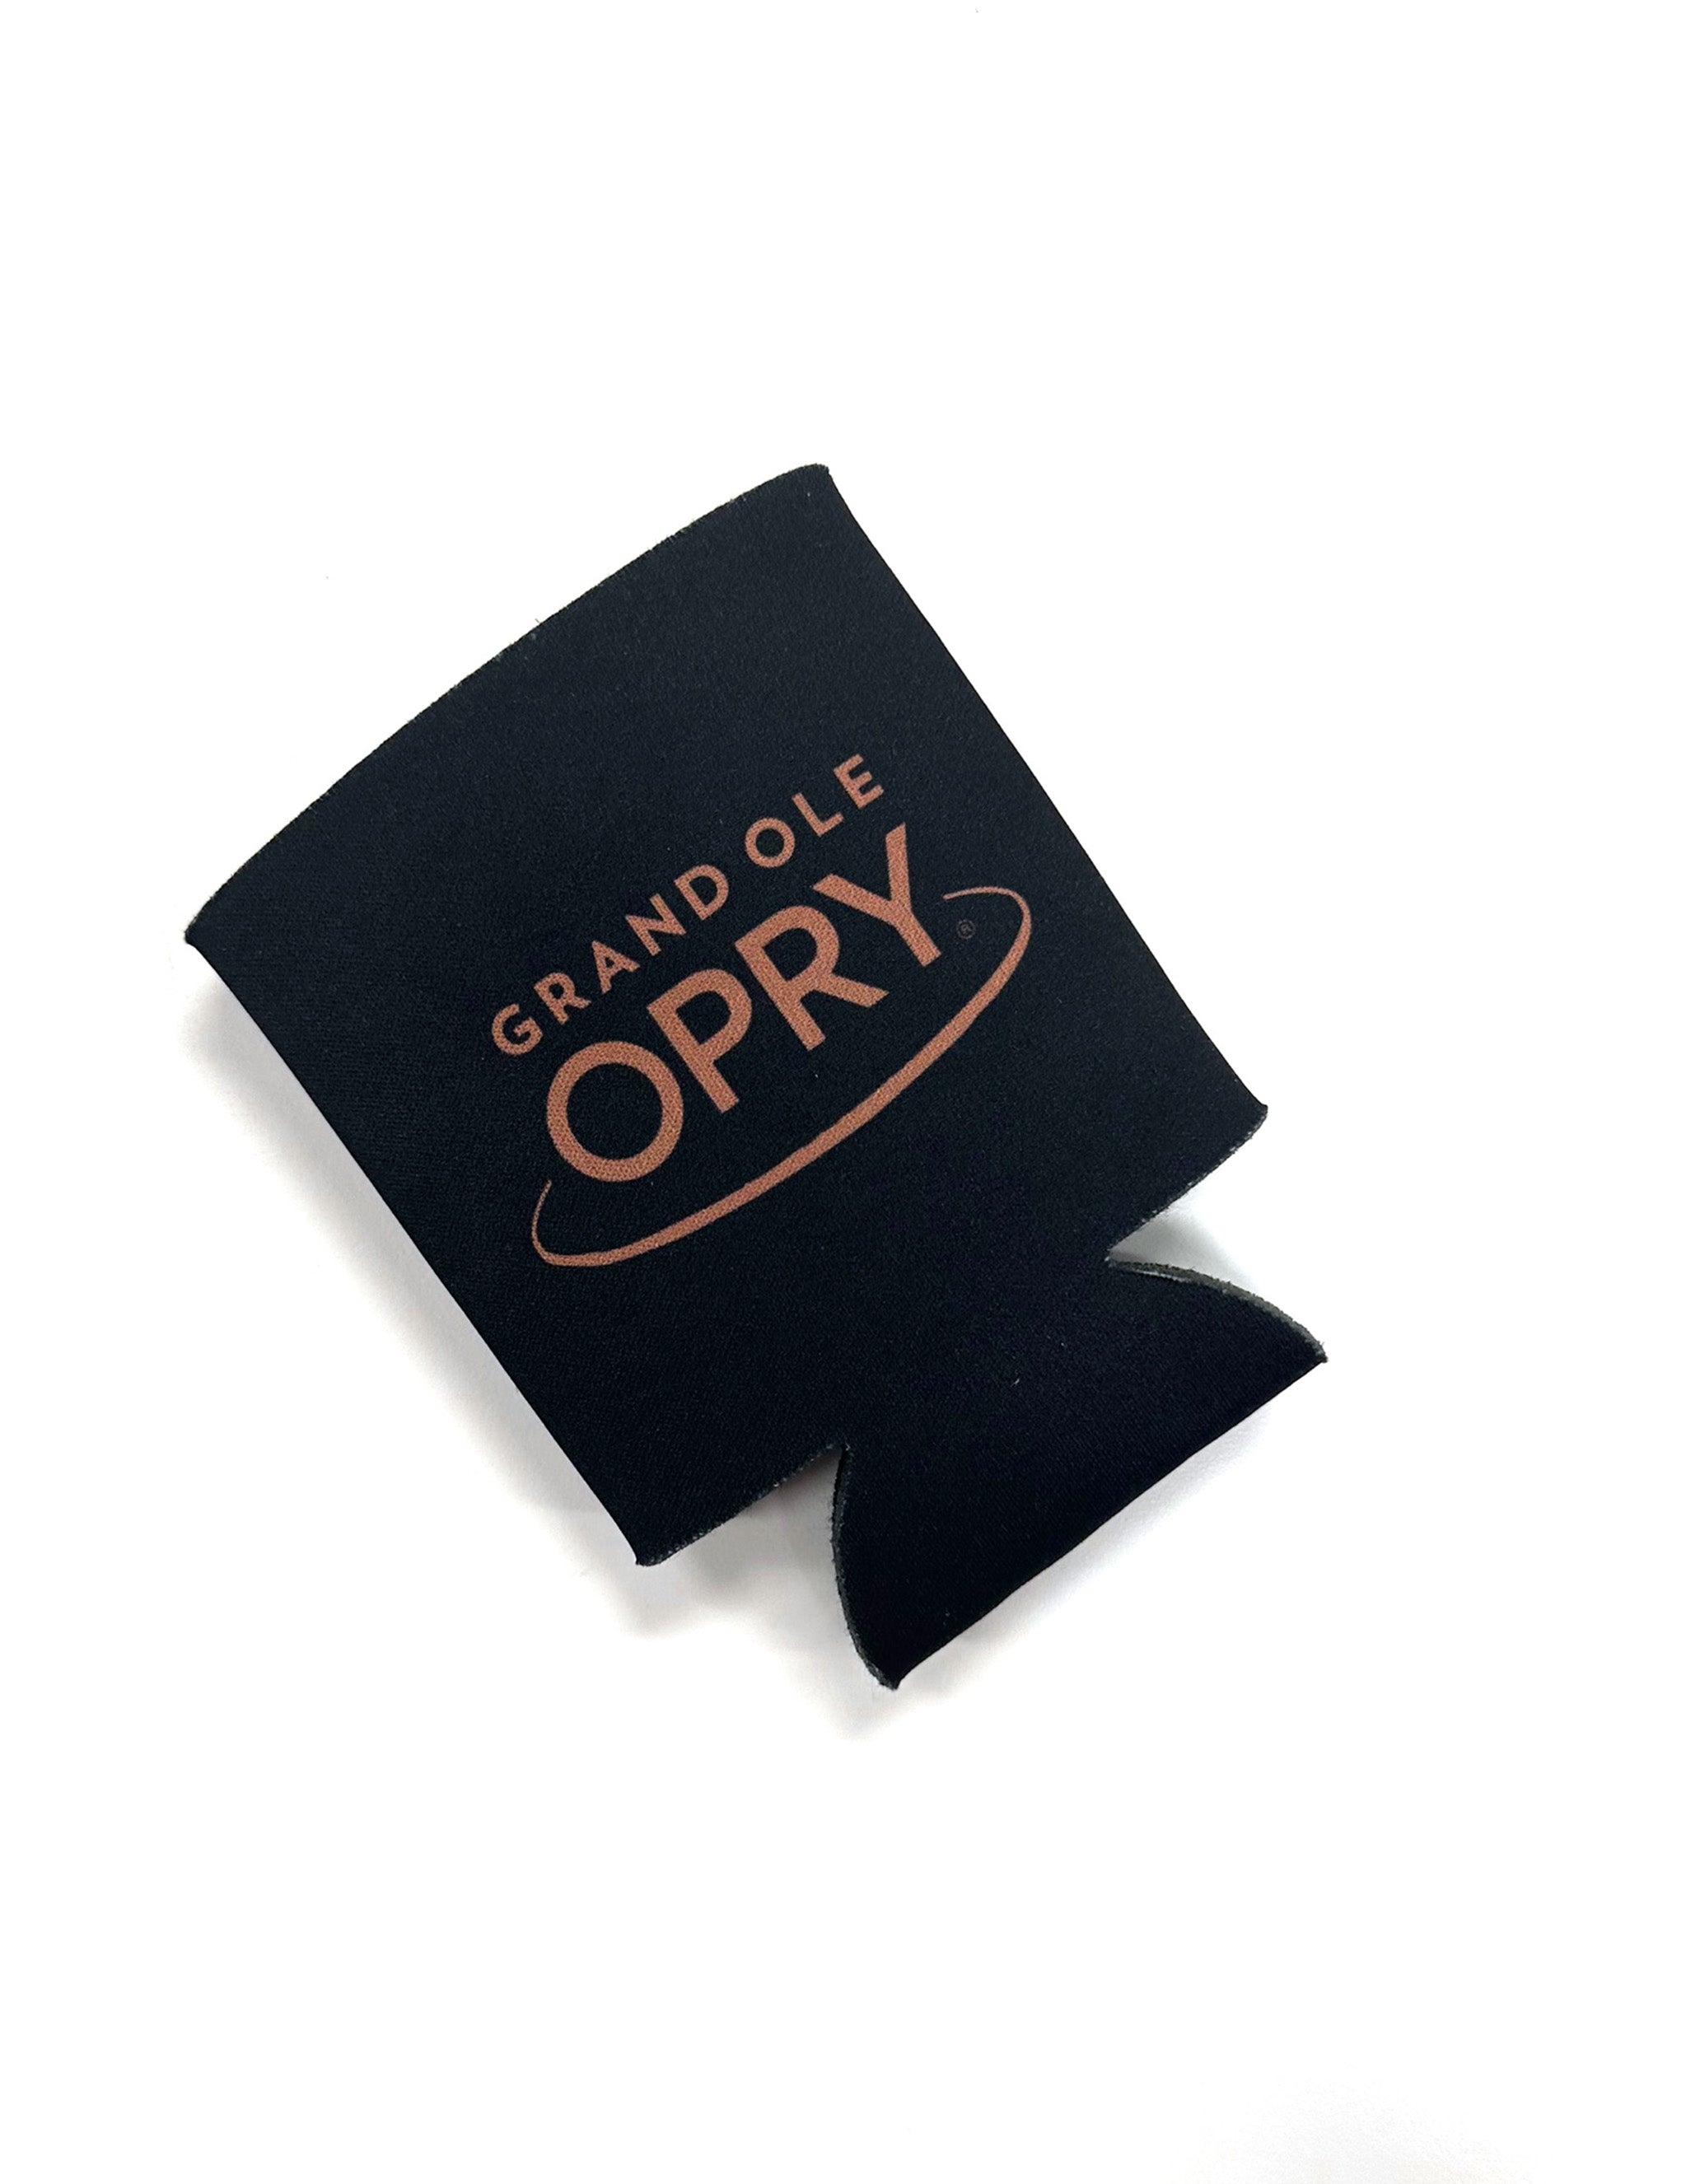 Carly Pearce Opry Exclusive 100th Show Retro Koozie